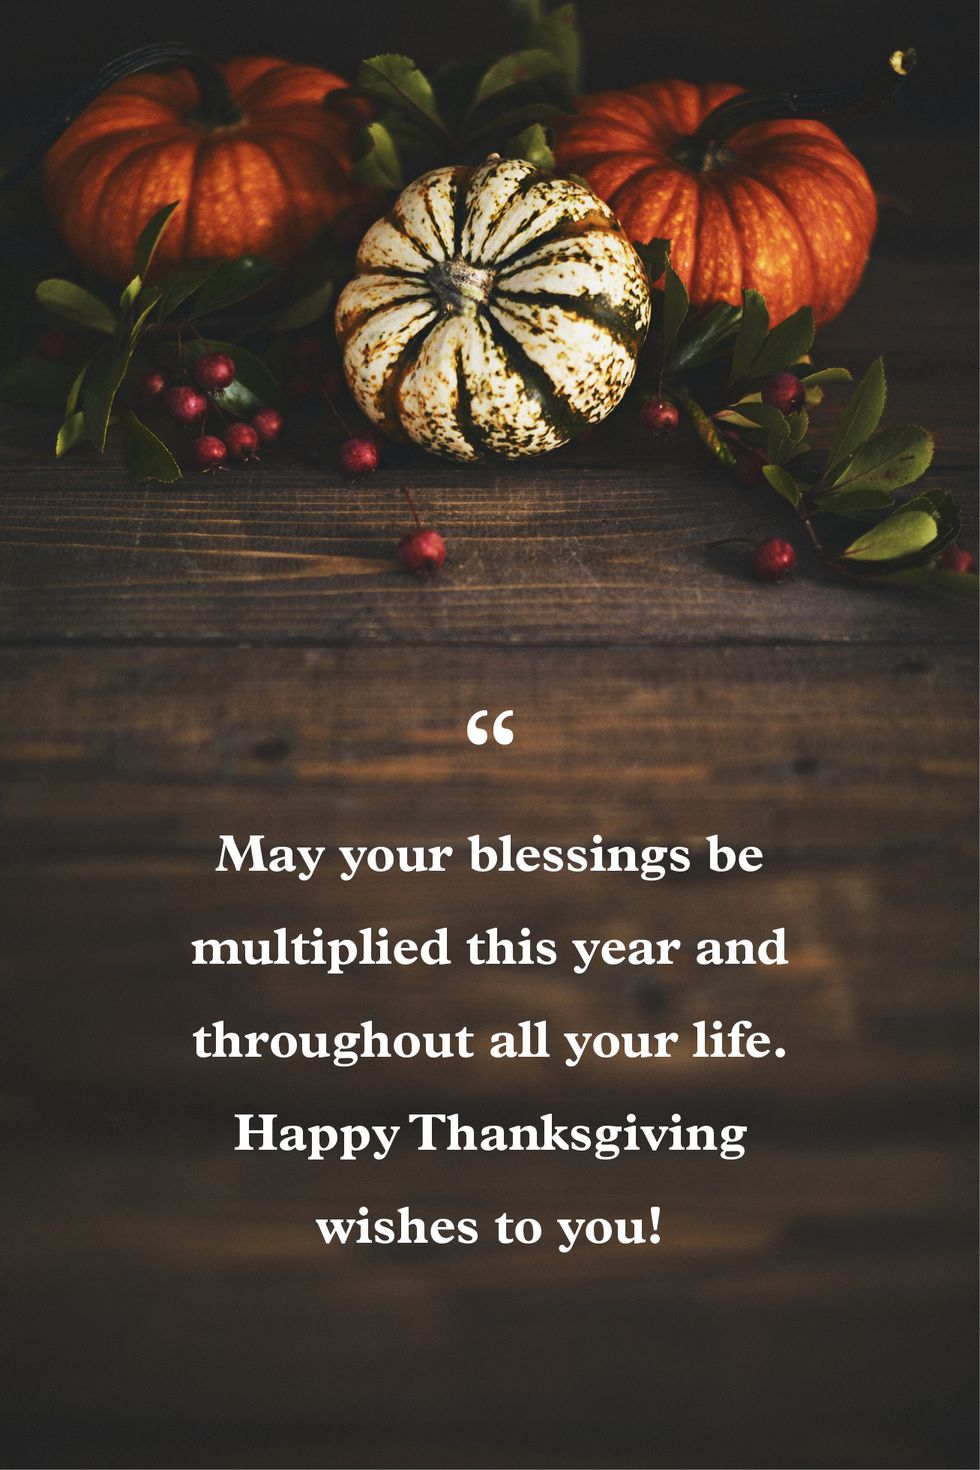 Happy Thanksgiving 2023: Images, Quotes, Messages, Greetings